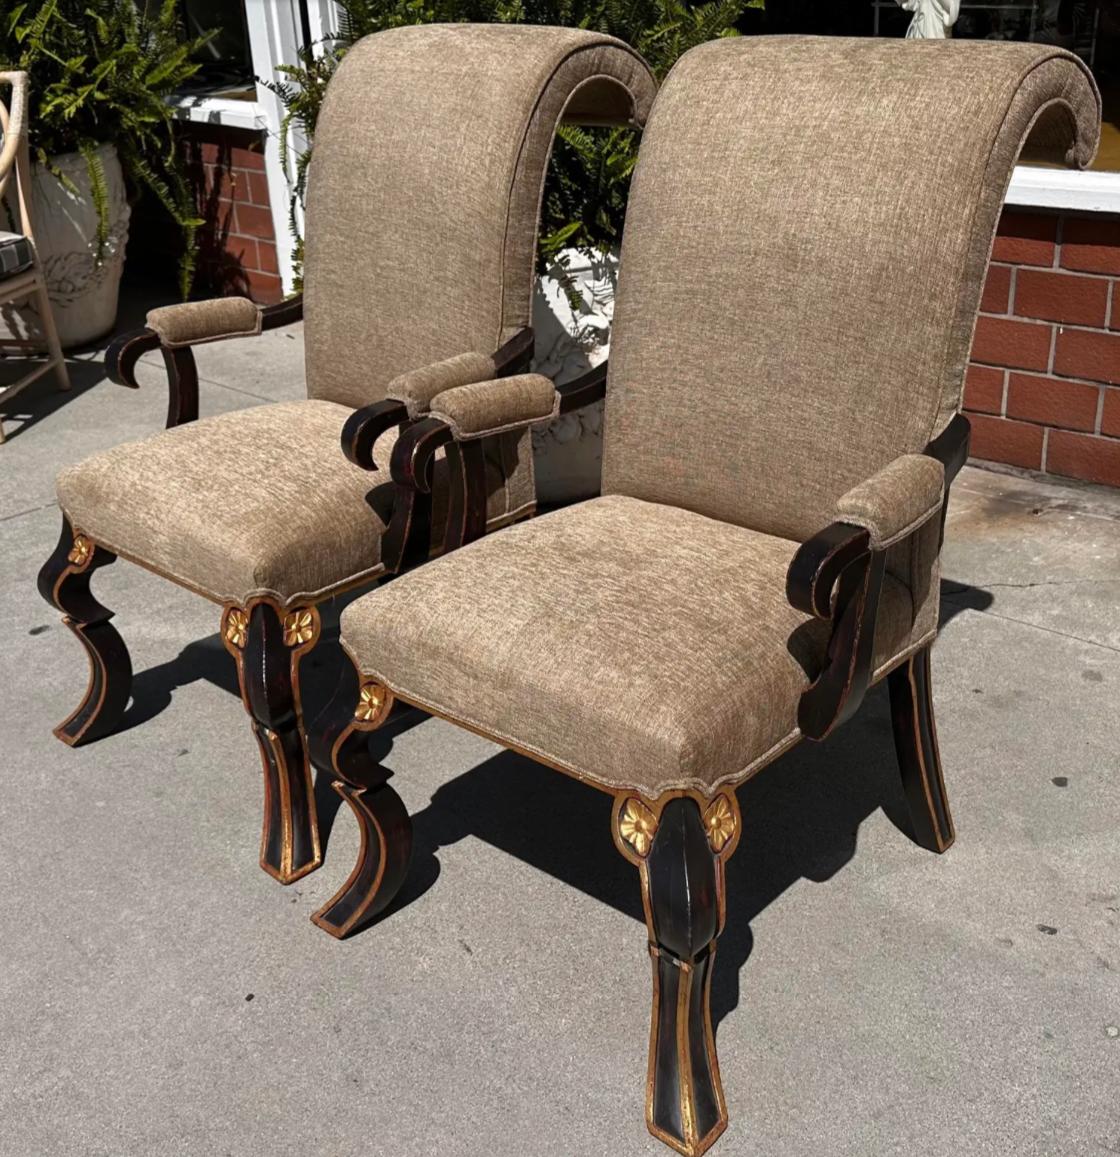 Ein Paar Rose Tarlow Black Chinoiserie Scroll Back Puccini Arm Chairs. Alle frisch gepolstert mit Caraggio-Stoff.